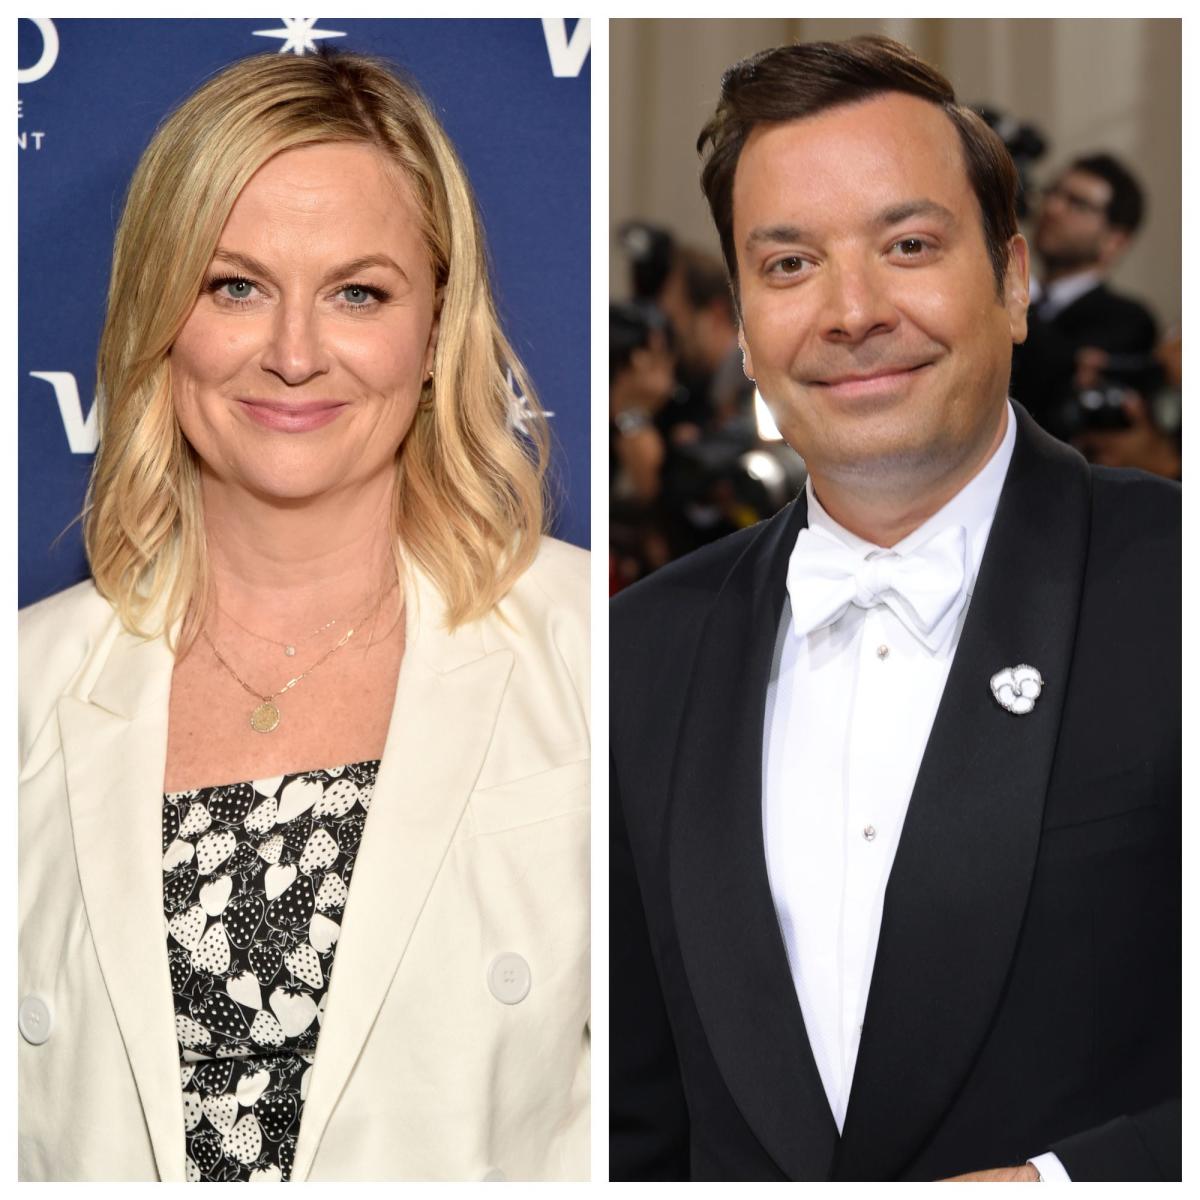 Amy Poehler, Jimmy Fallon’s tense ‘SNL’ moment goes viral after ‘Tonight Show’ allegations